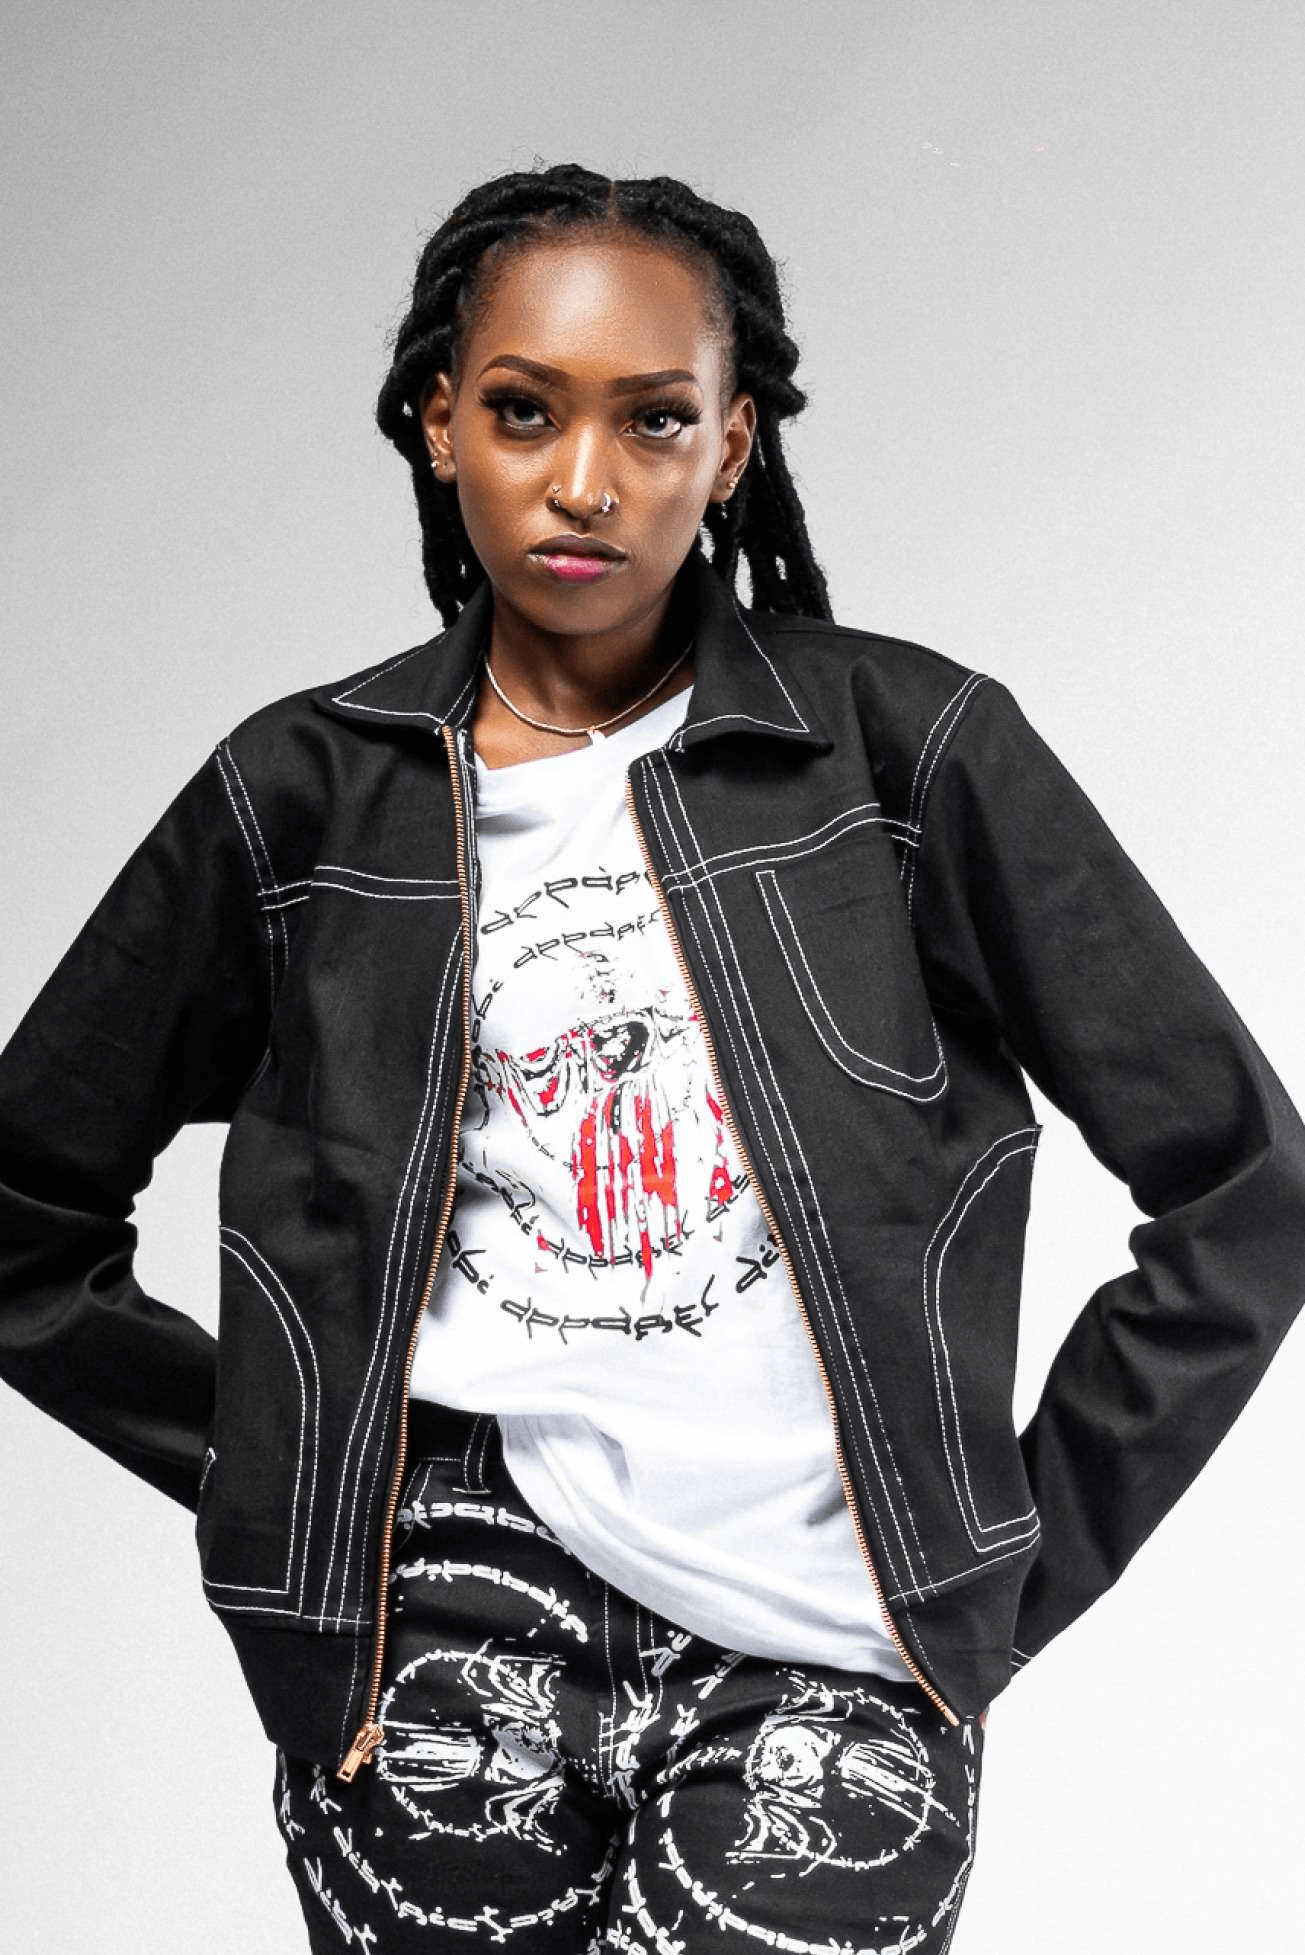 Shop JC Full Circle Black Denim Jacket by Nairobi Apparel District on Arrai. Discover stylish, affordable clothing, jewelry, handbags and unique handmade pieces from top Kenyan & African fashion brands prioritising sustainability and quality craftsmanship